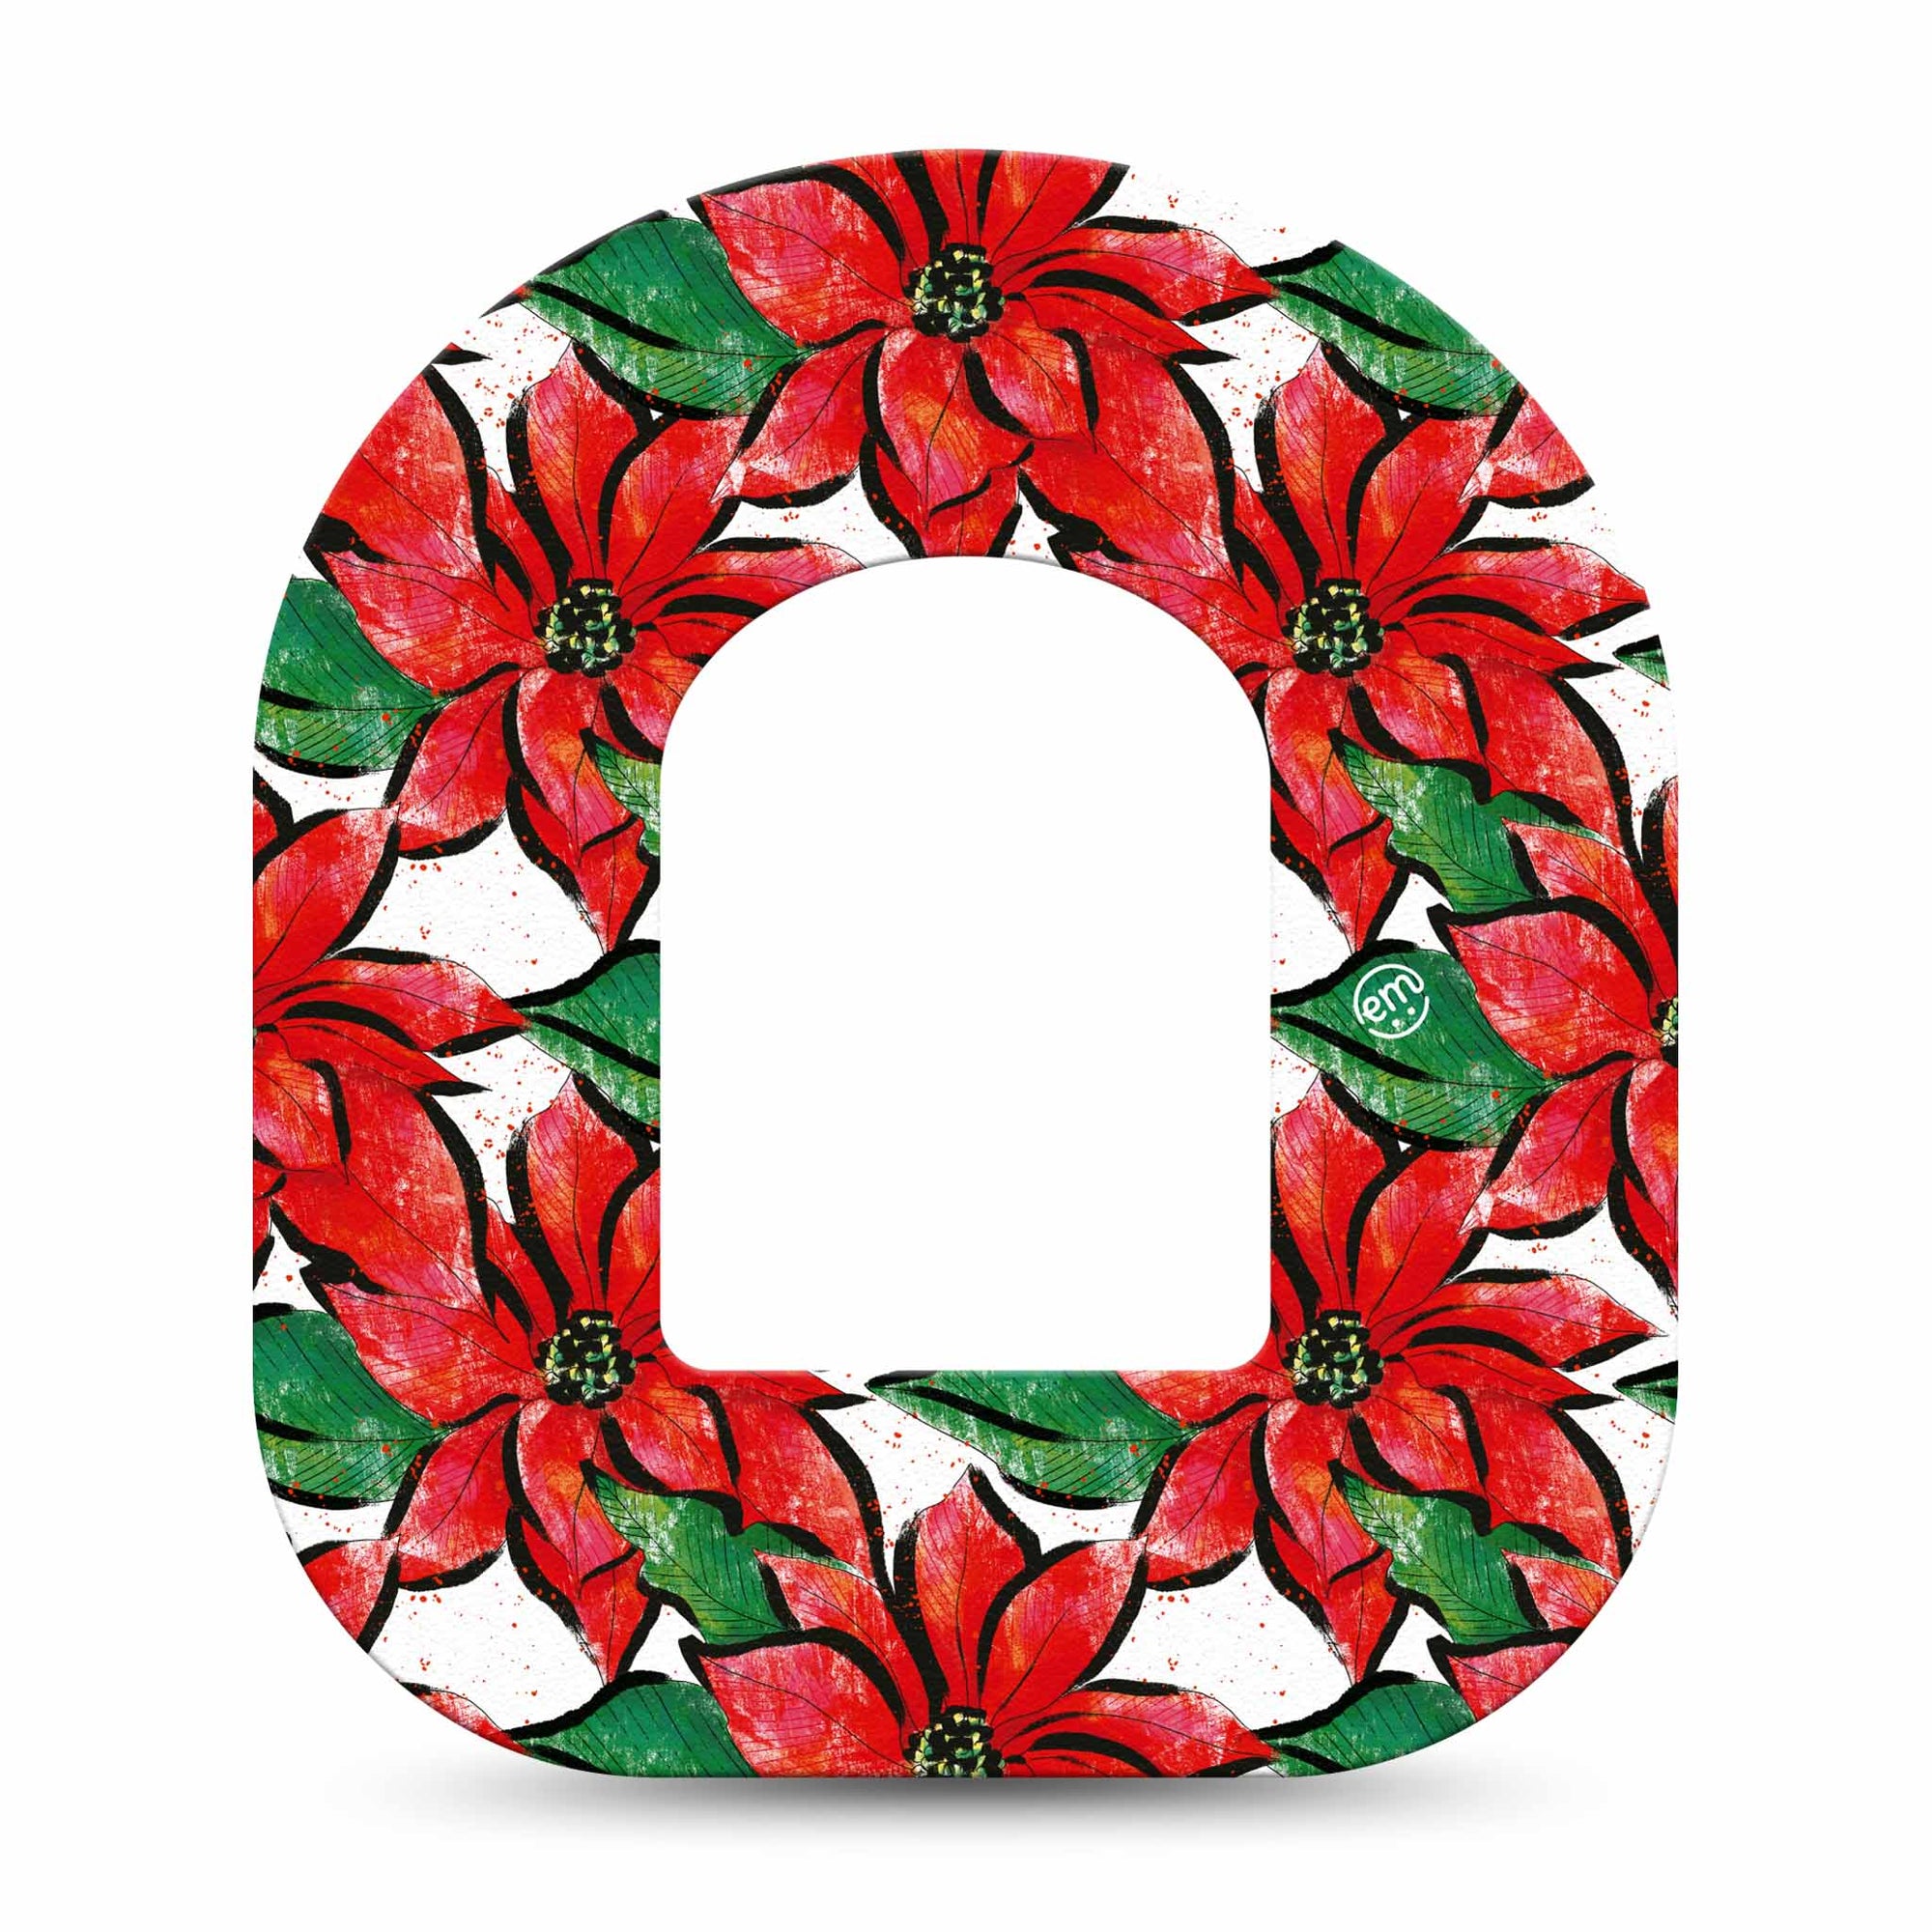 ExpressionMed Poinsettia Omnipod Patch, Single CGM Adhesive Tape, Holiday Themed Design